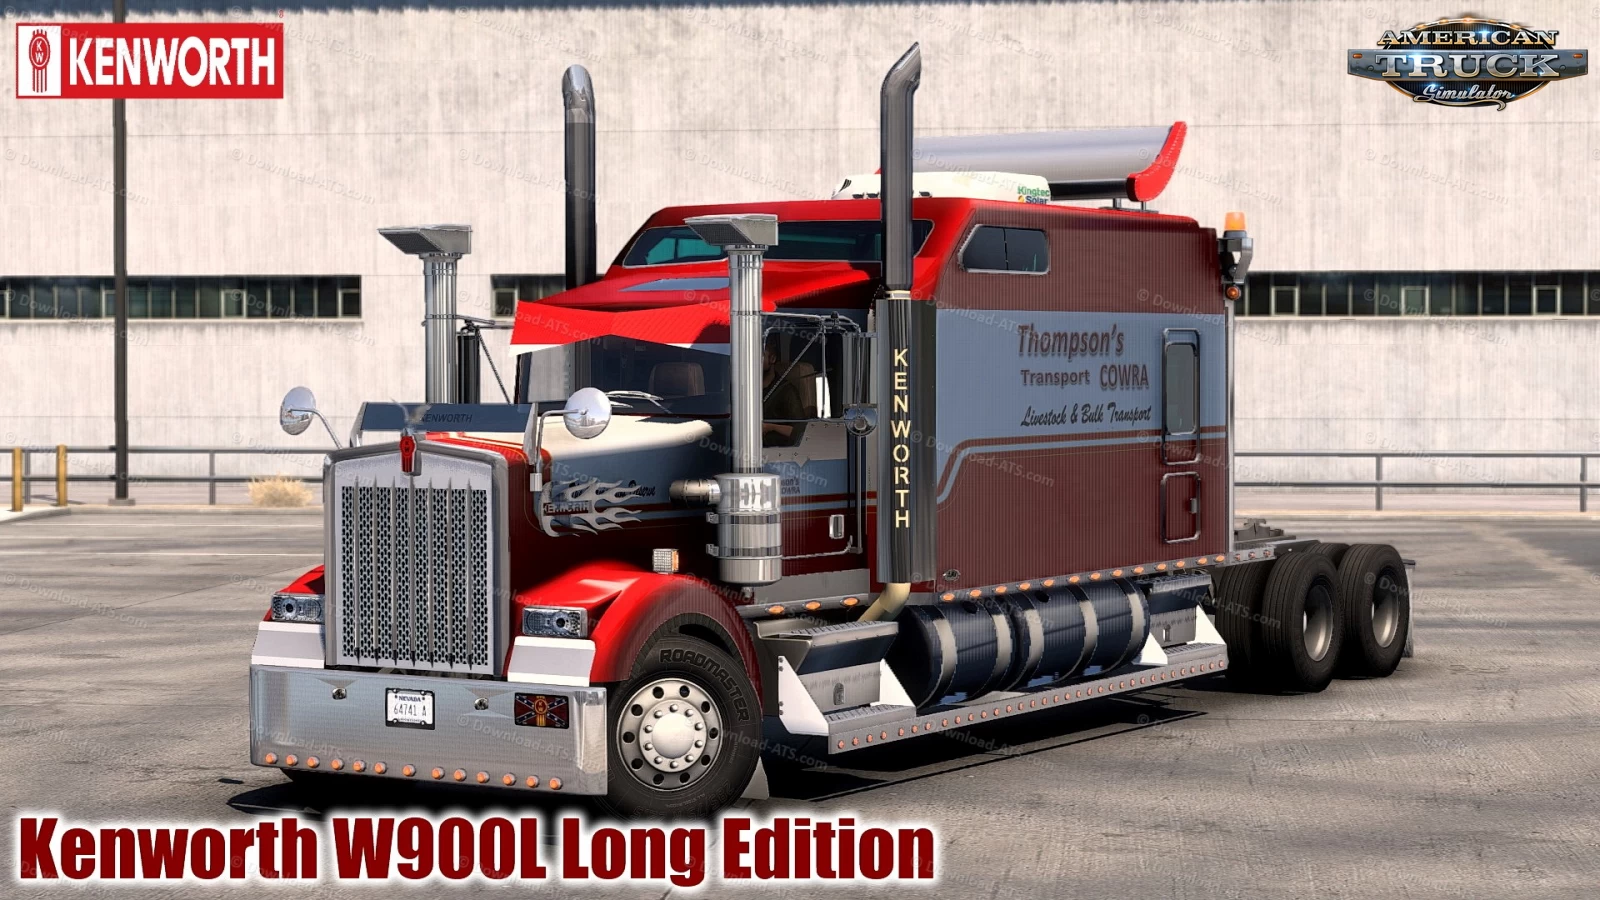 Kenworth W900L Long Edition Truck v1.0 (1.43.x) for ATS